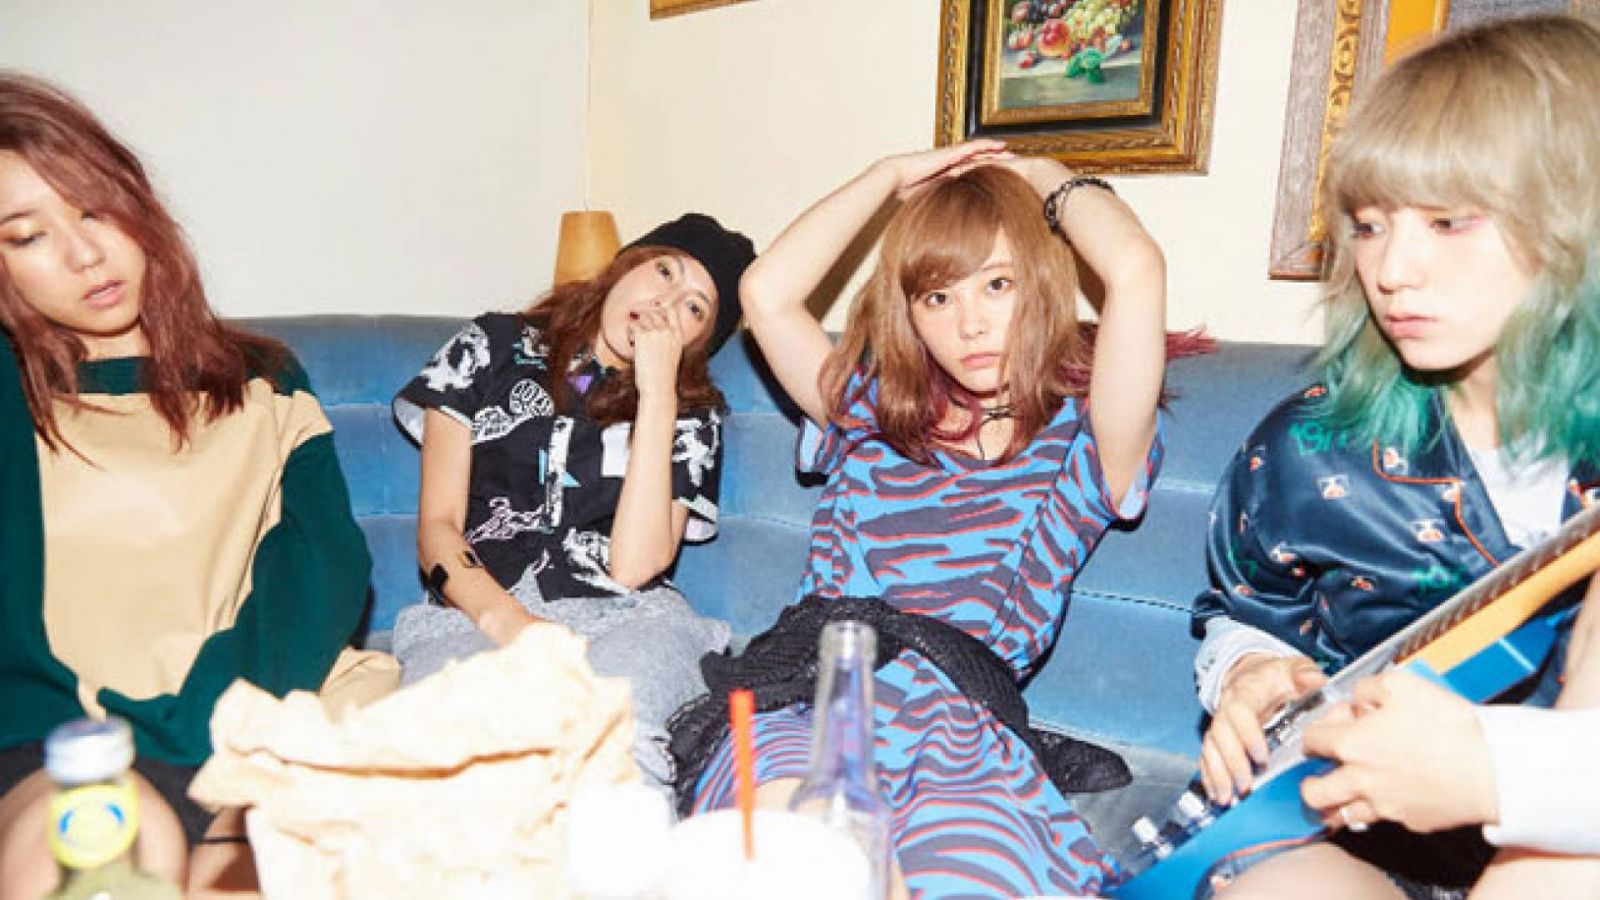 SCANDAL's Sisters Now Available in the UK and Europe © Epic Records Japan. All rights reserved.